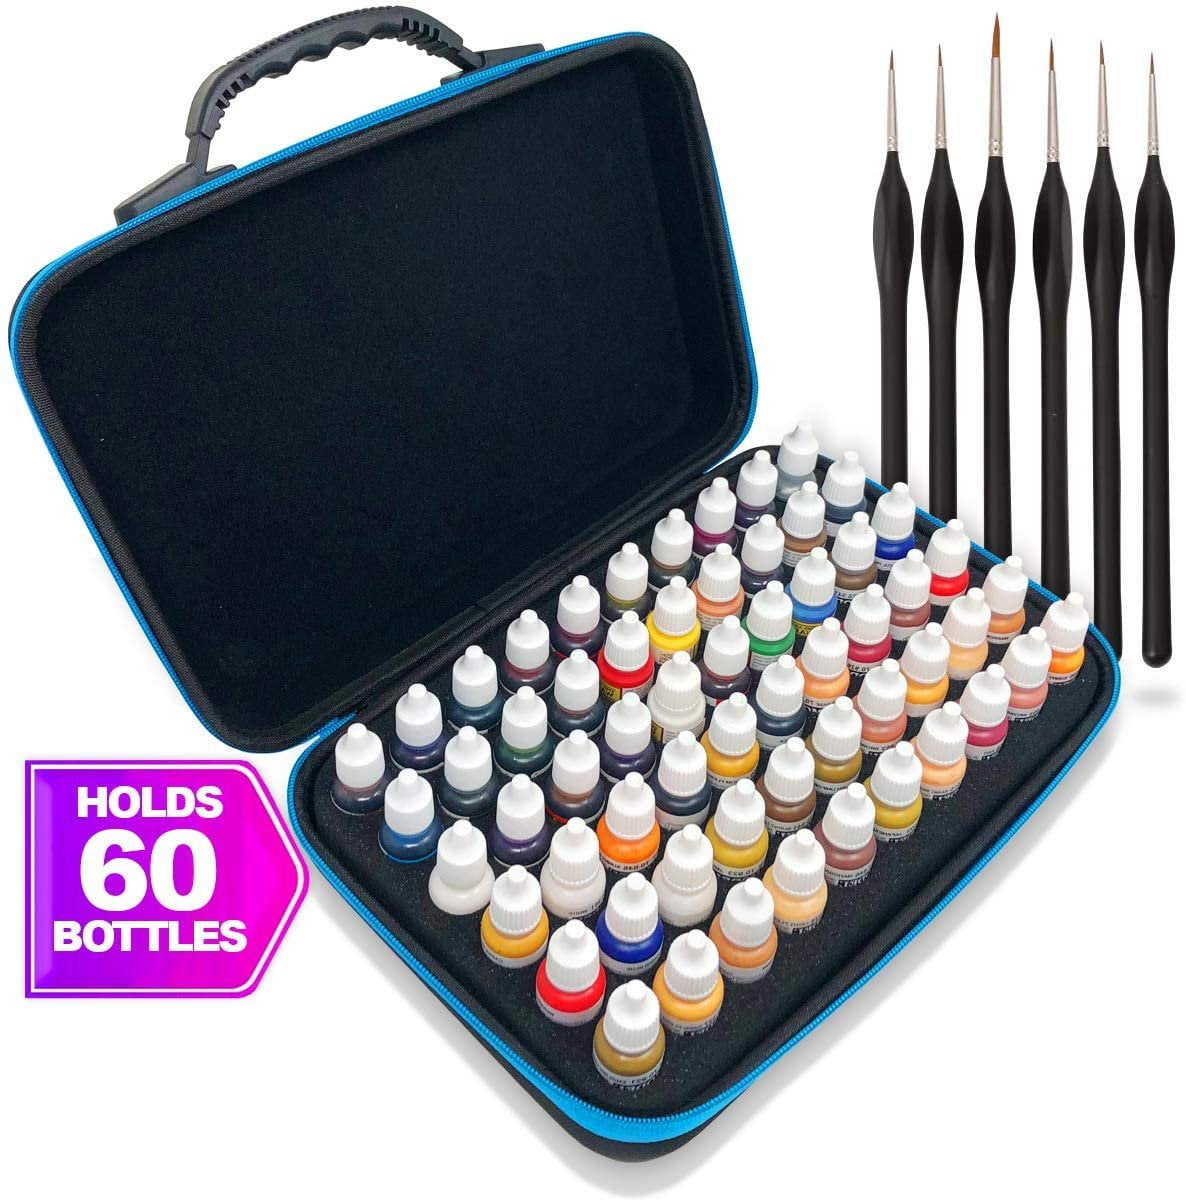 Pixiss Model Paint Storage Case - Acrylic Paint Organizer Holder Tray Works  with Round Top Hobby Paint Brands - Pixiss Model Accessory Kit for Gundam